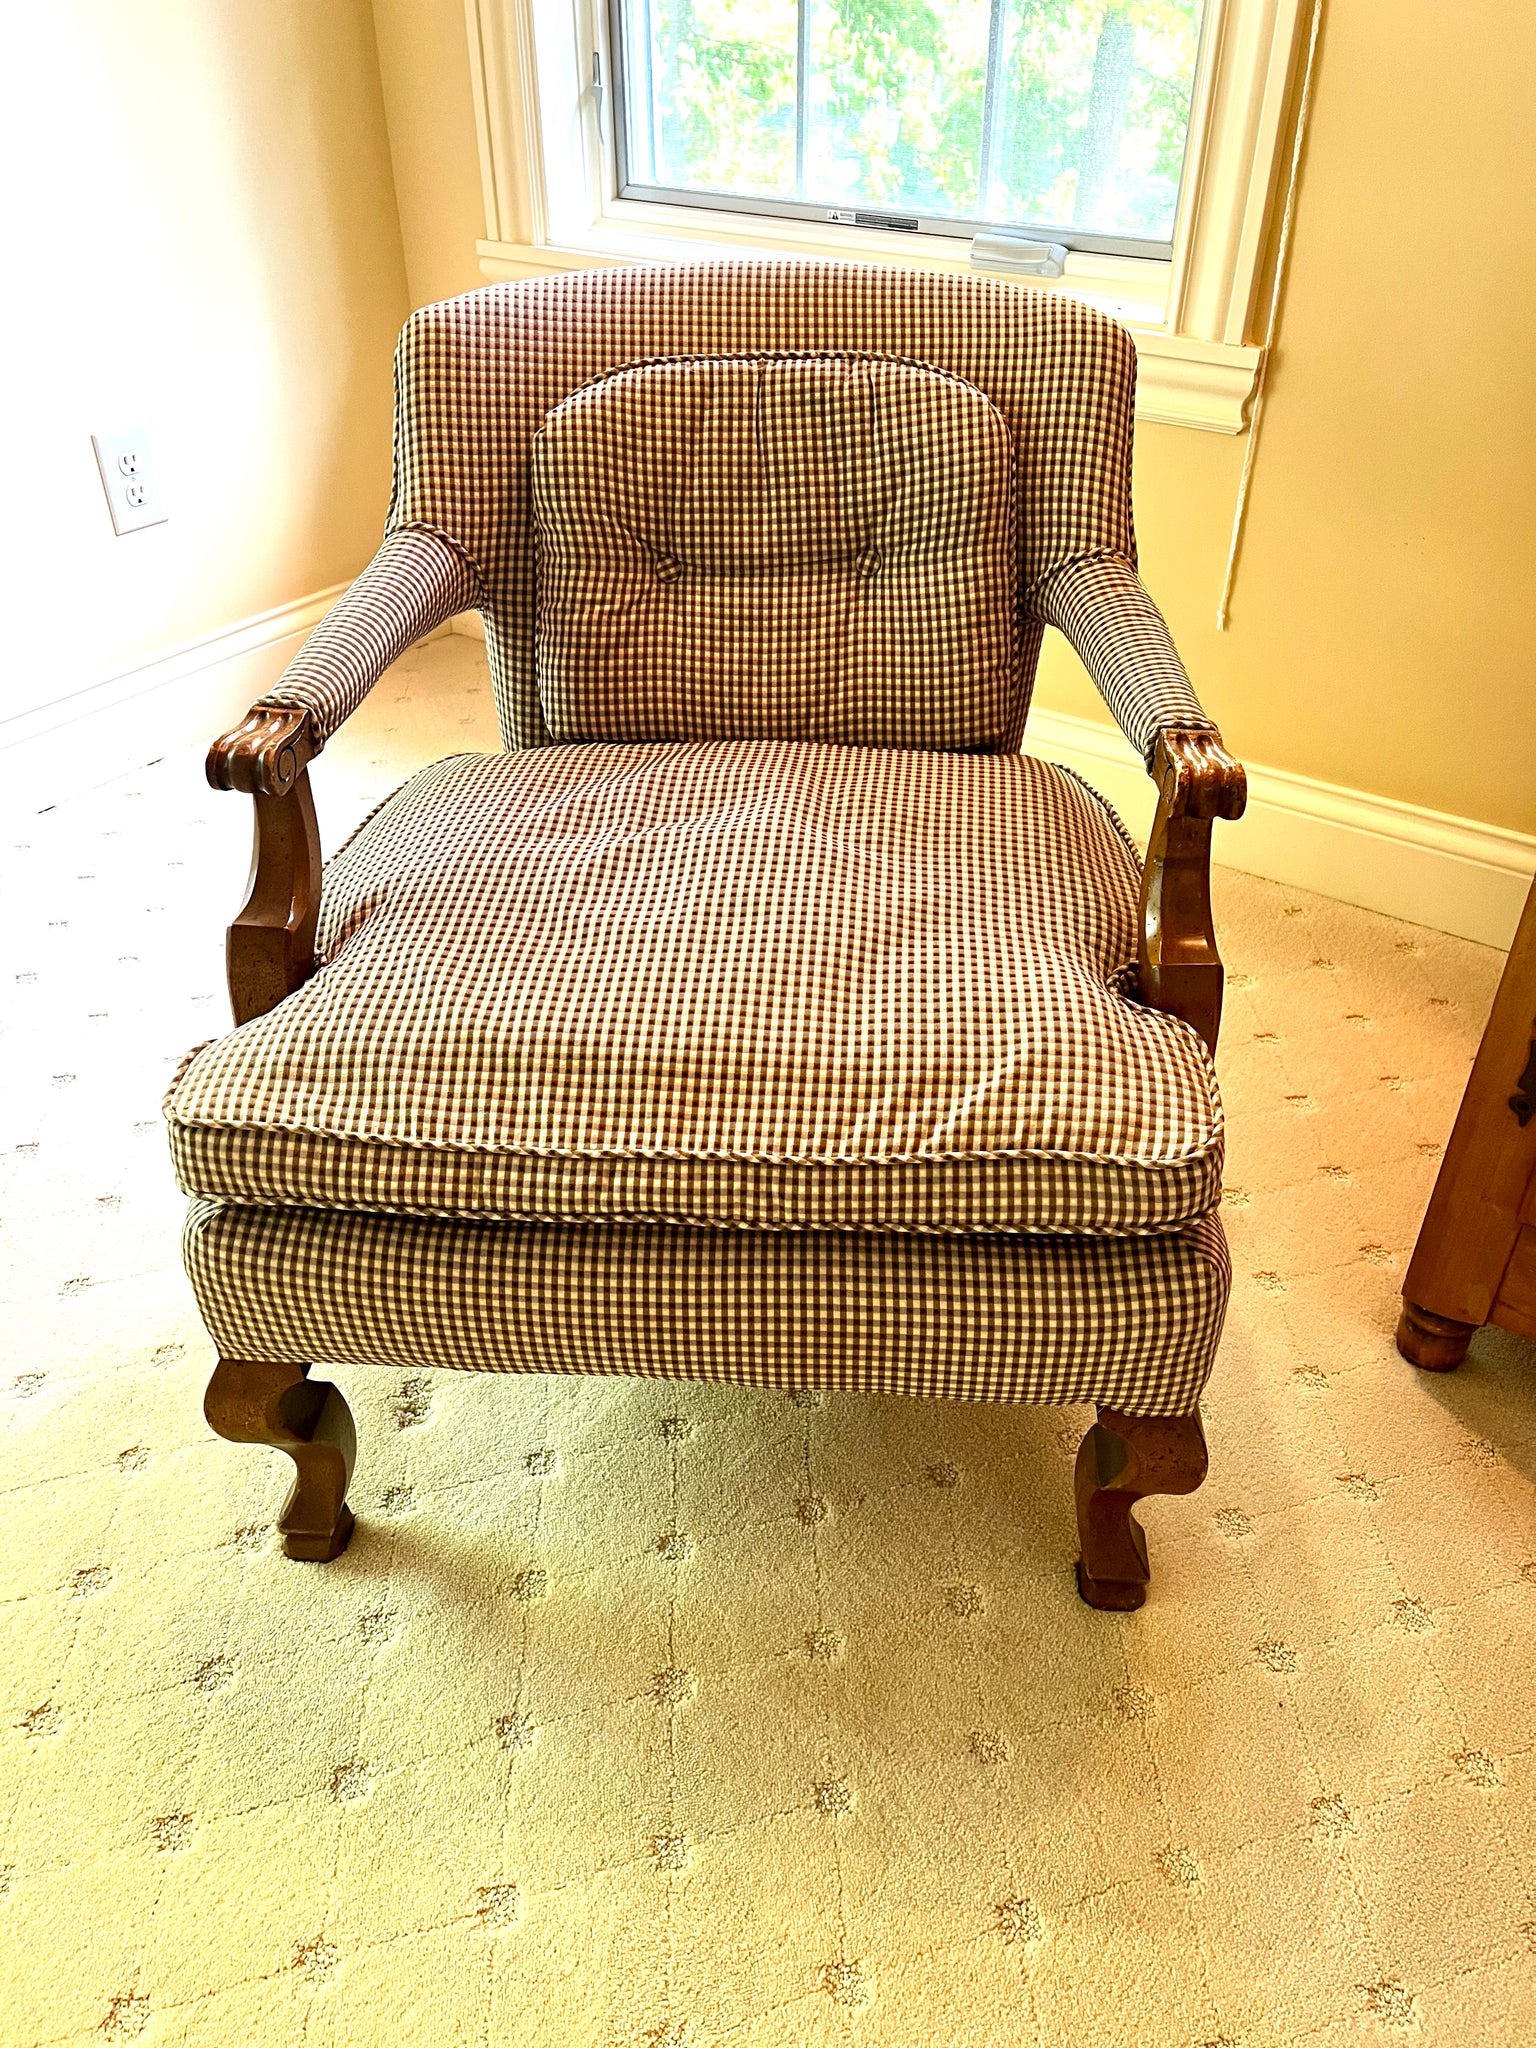 Pair of Vintage Houndstooth Club Chairs